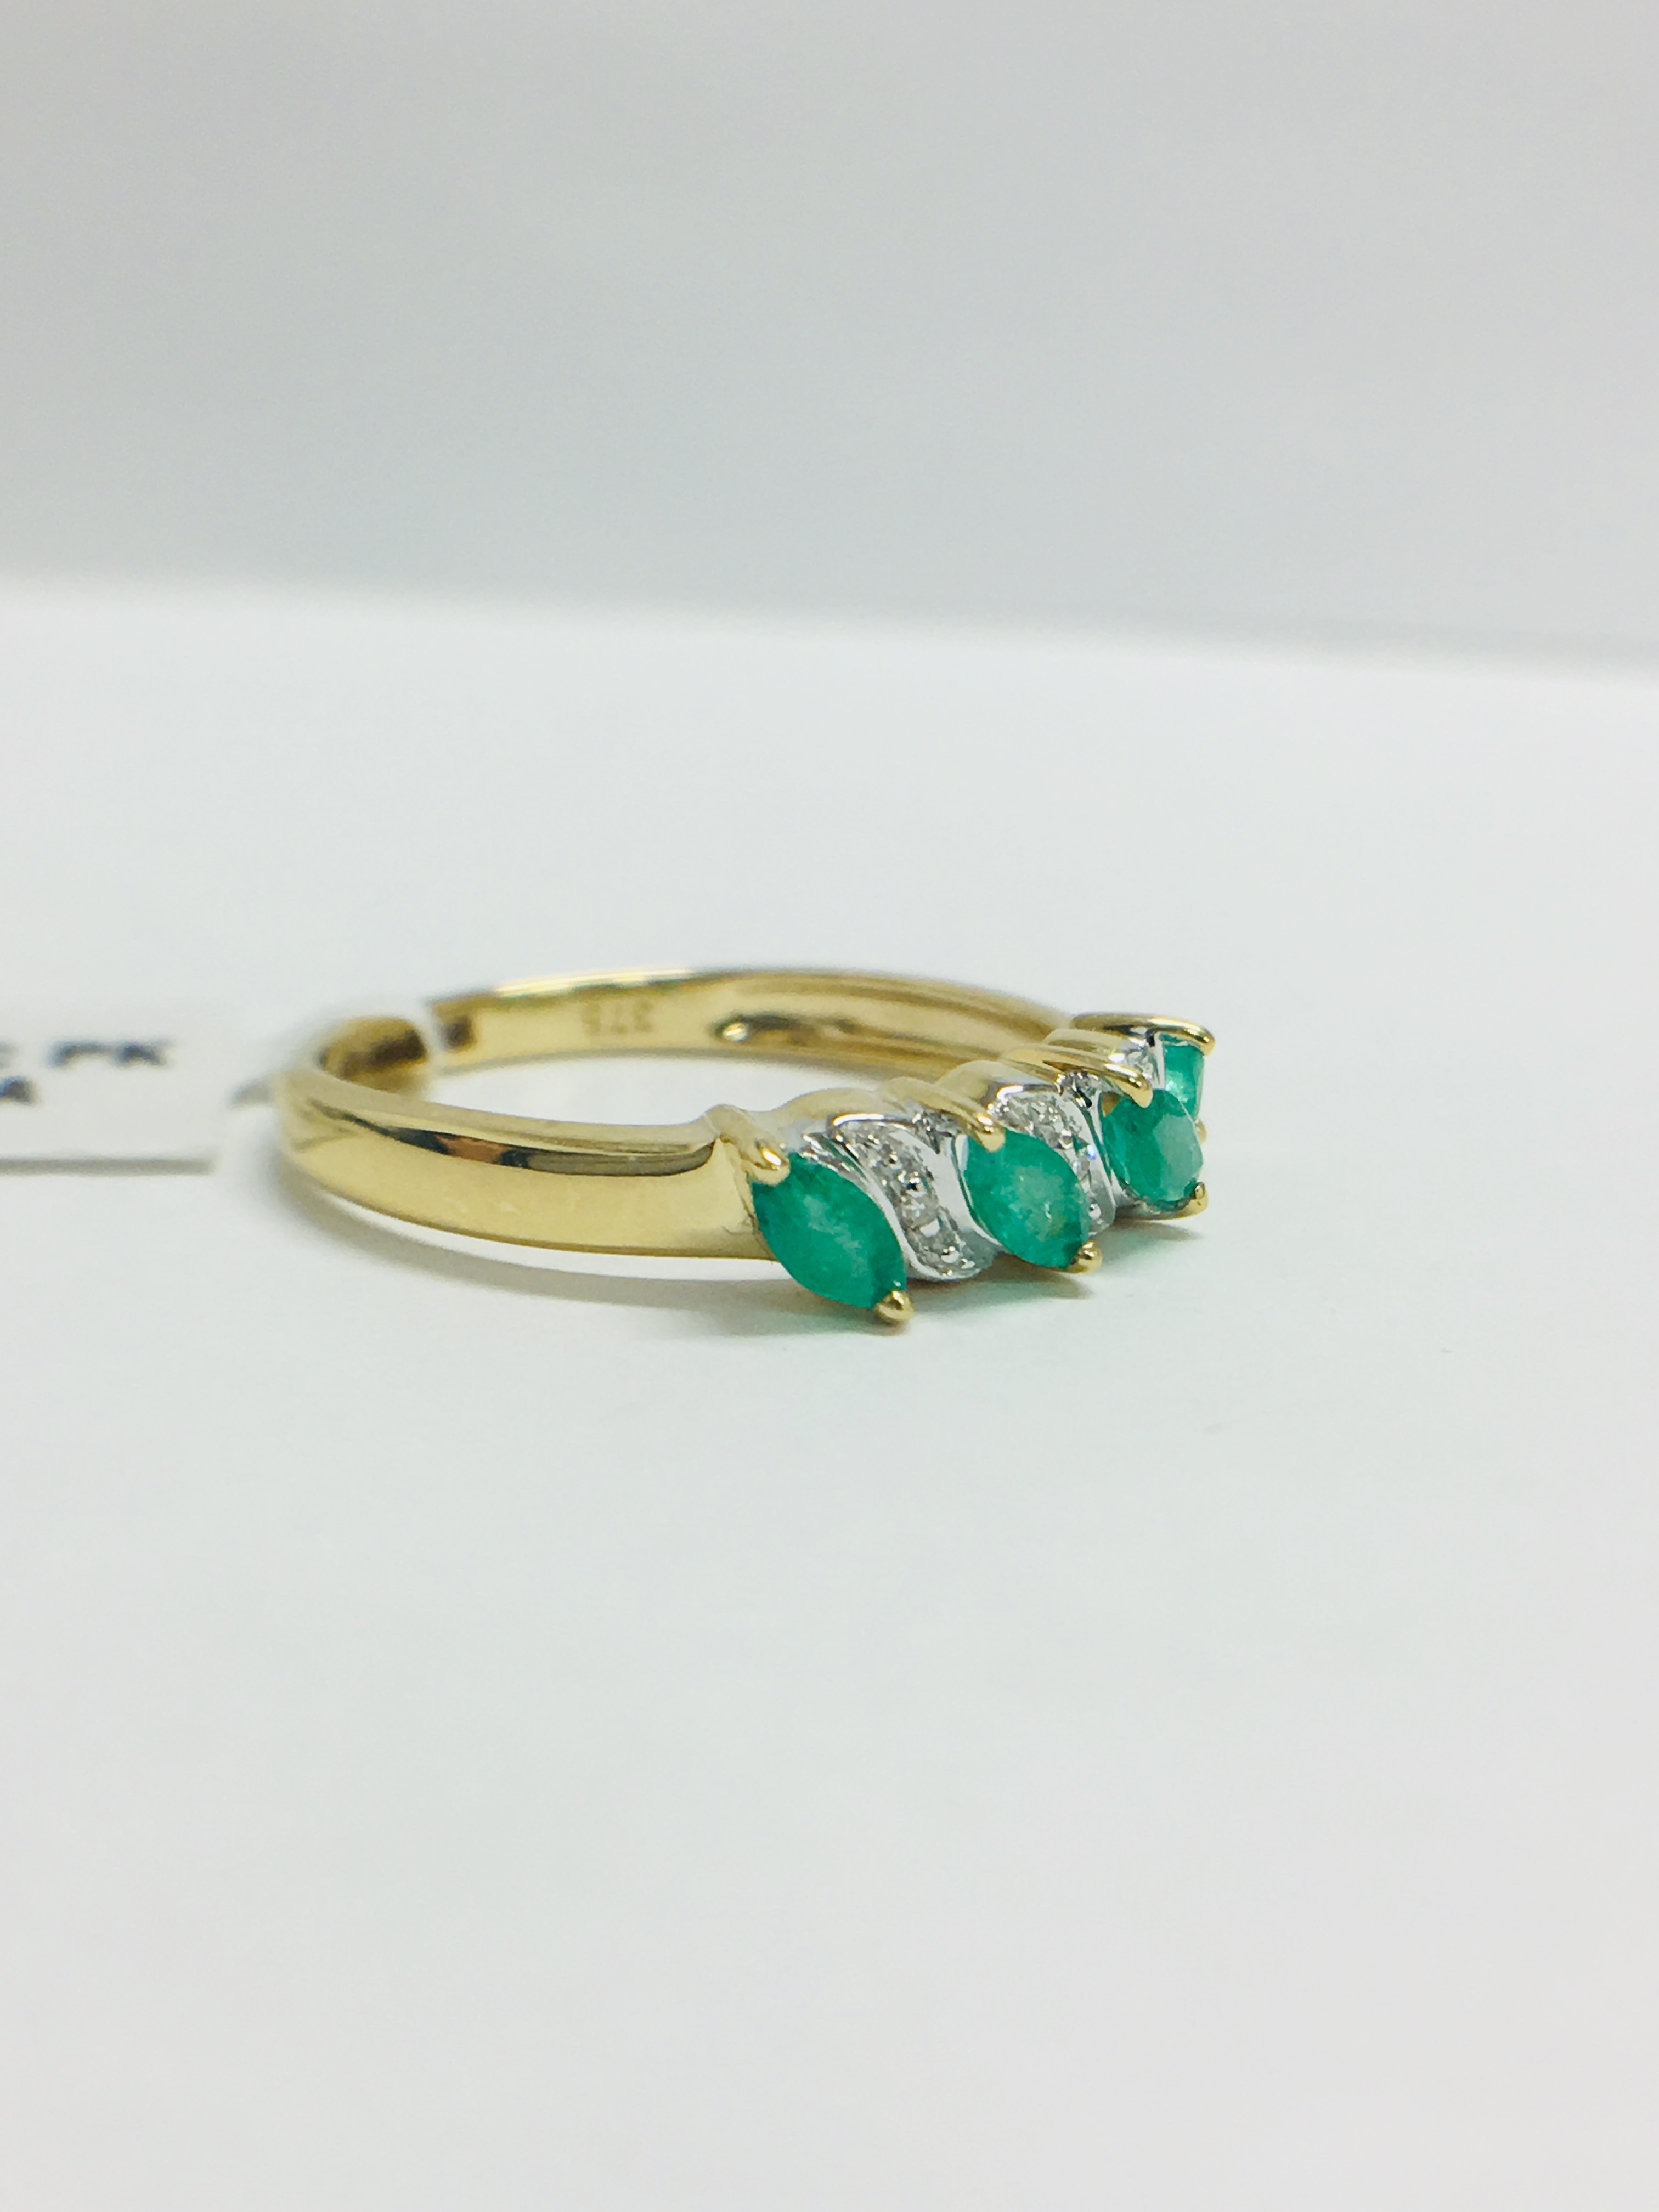 9ct yellow gold emerald and diamond ring - Image 9 of 11